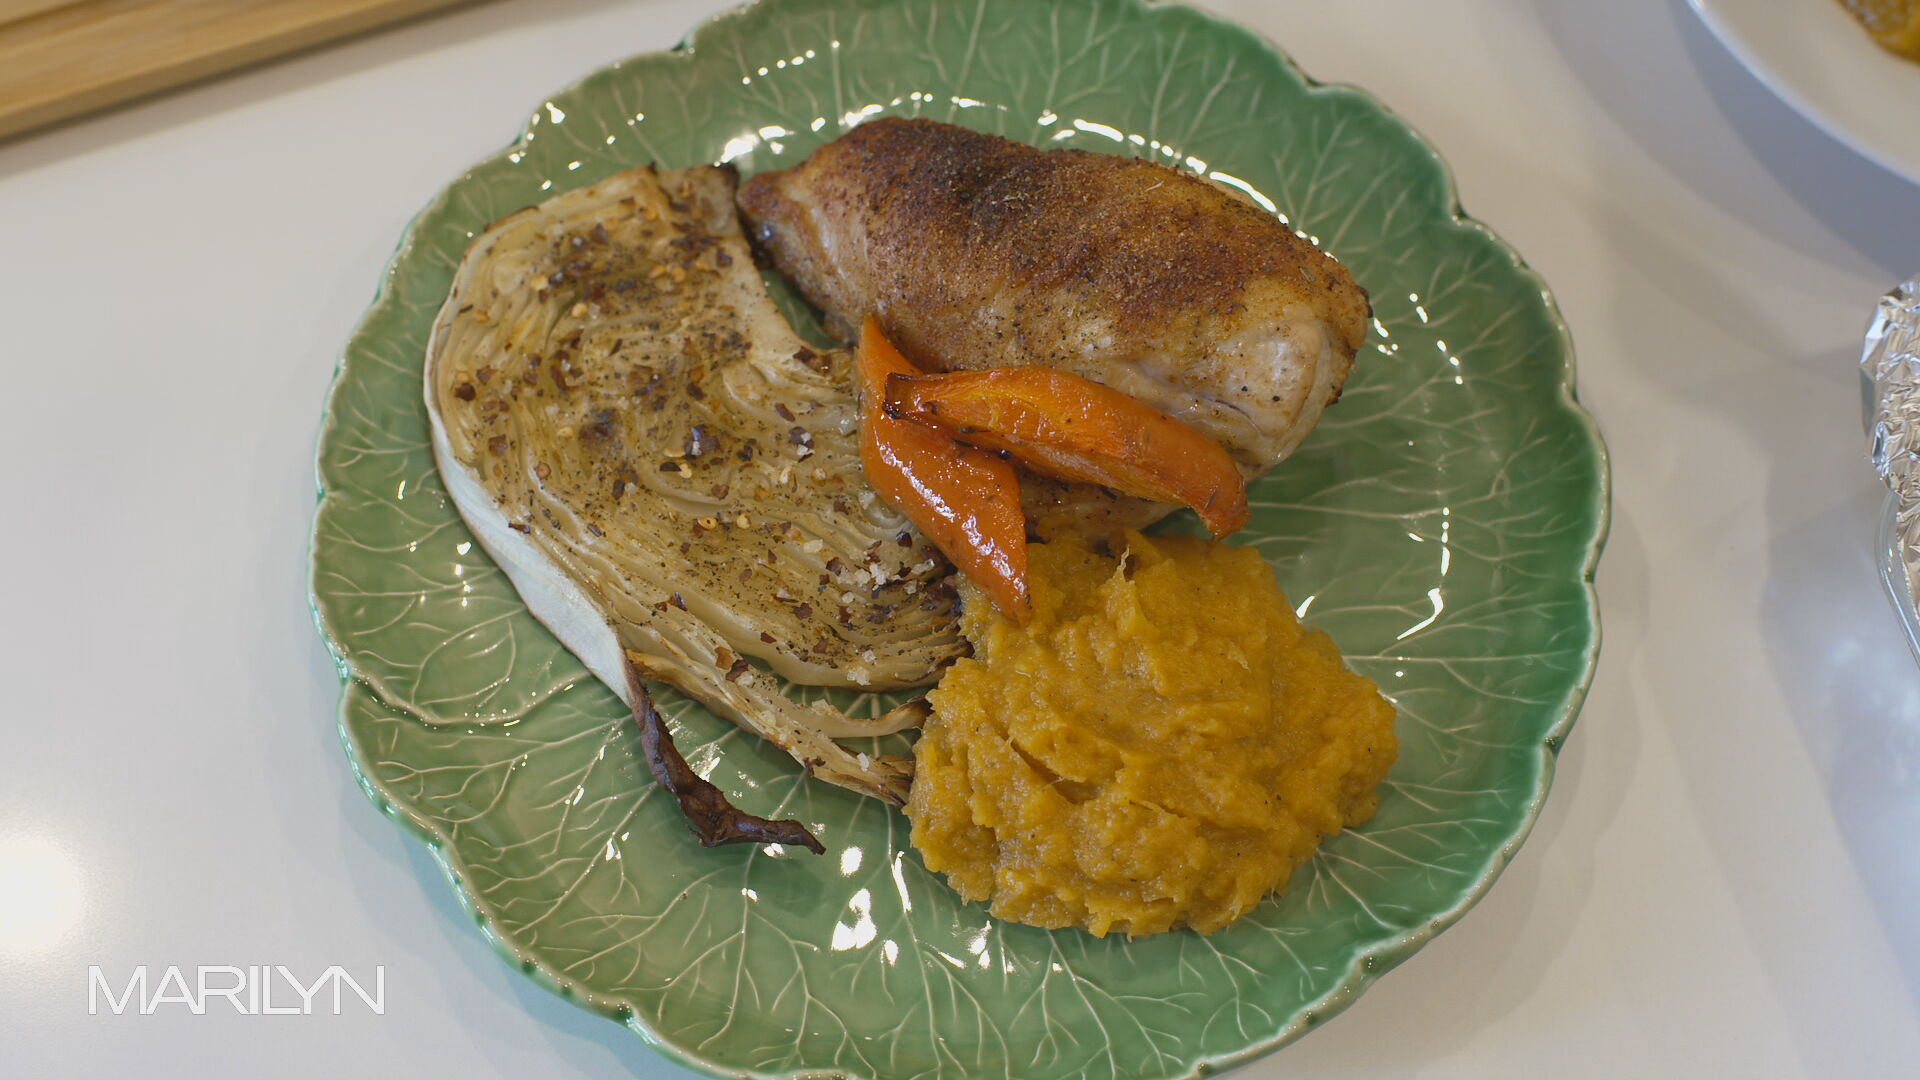 Stuffed roast chicken with red potato mash and maple glazed carrots